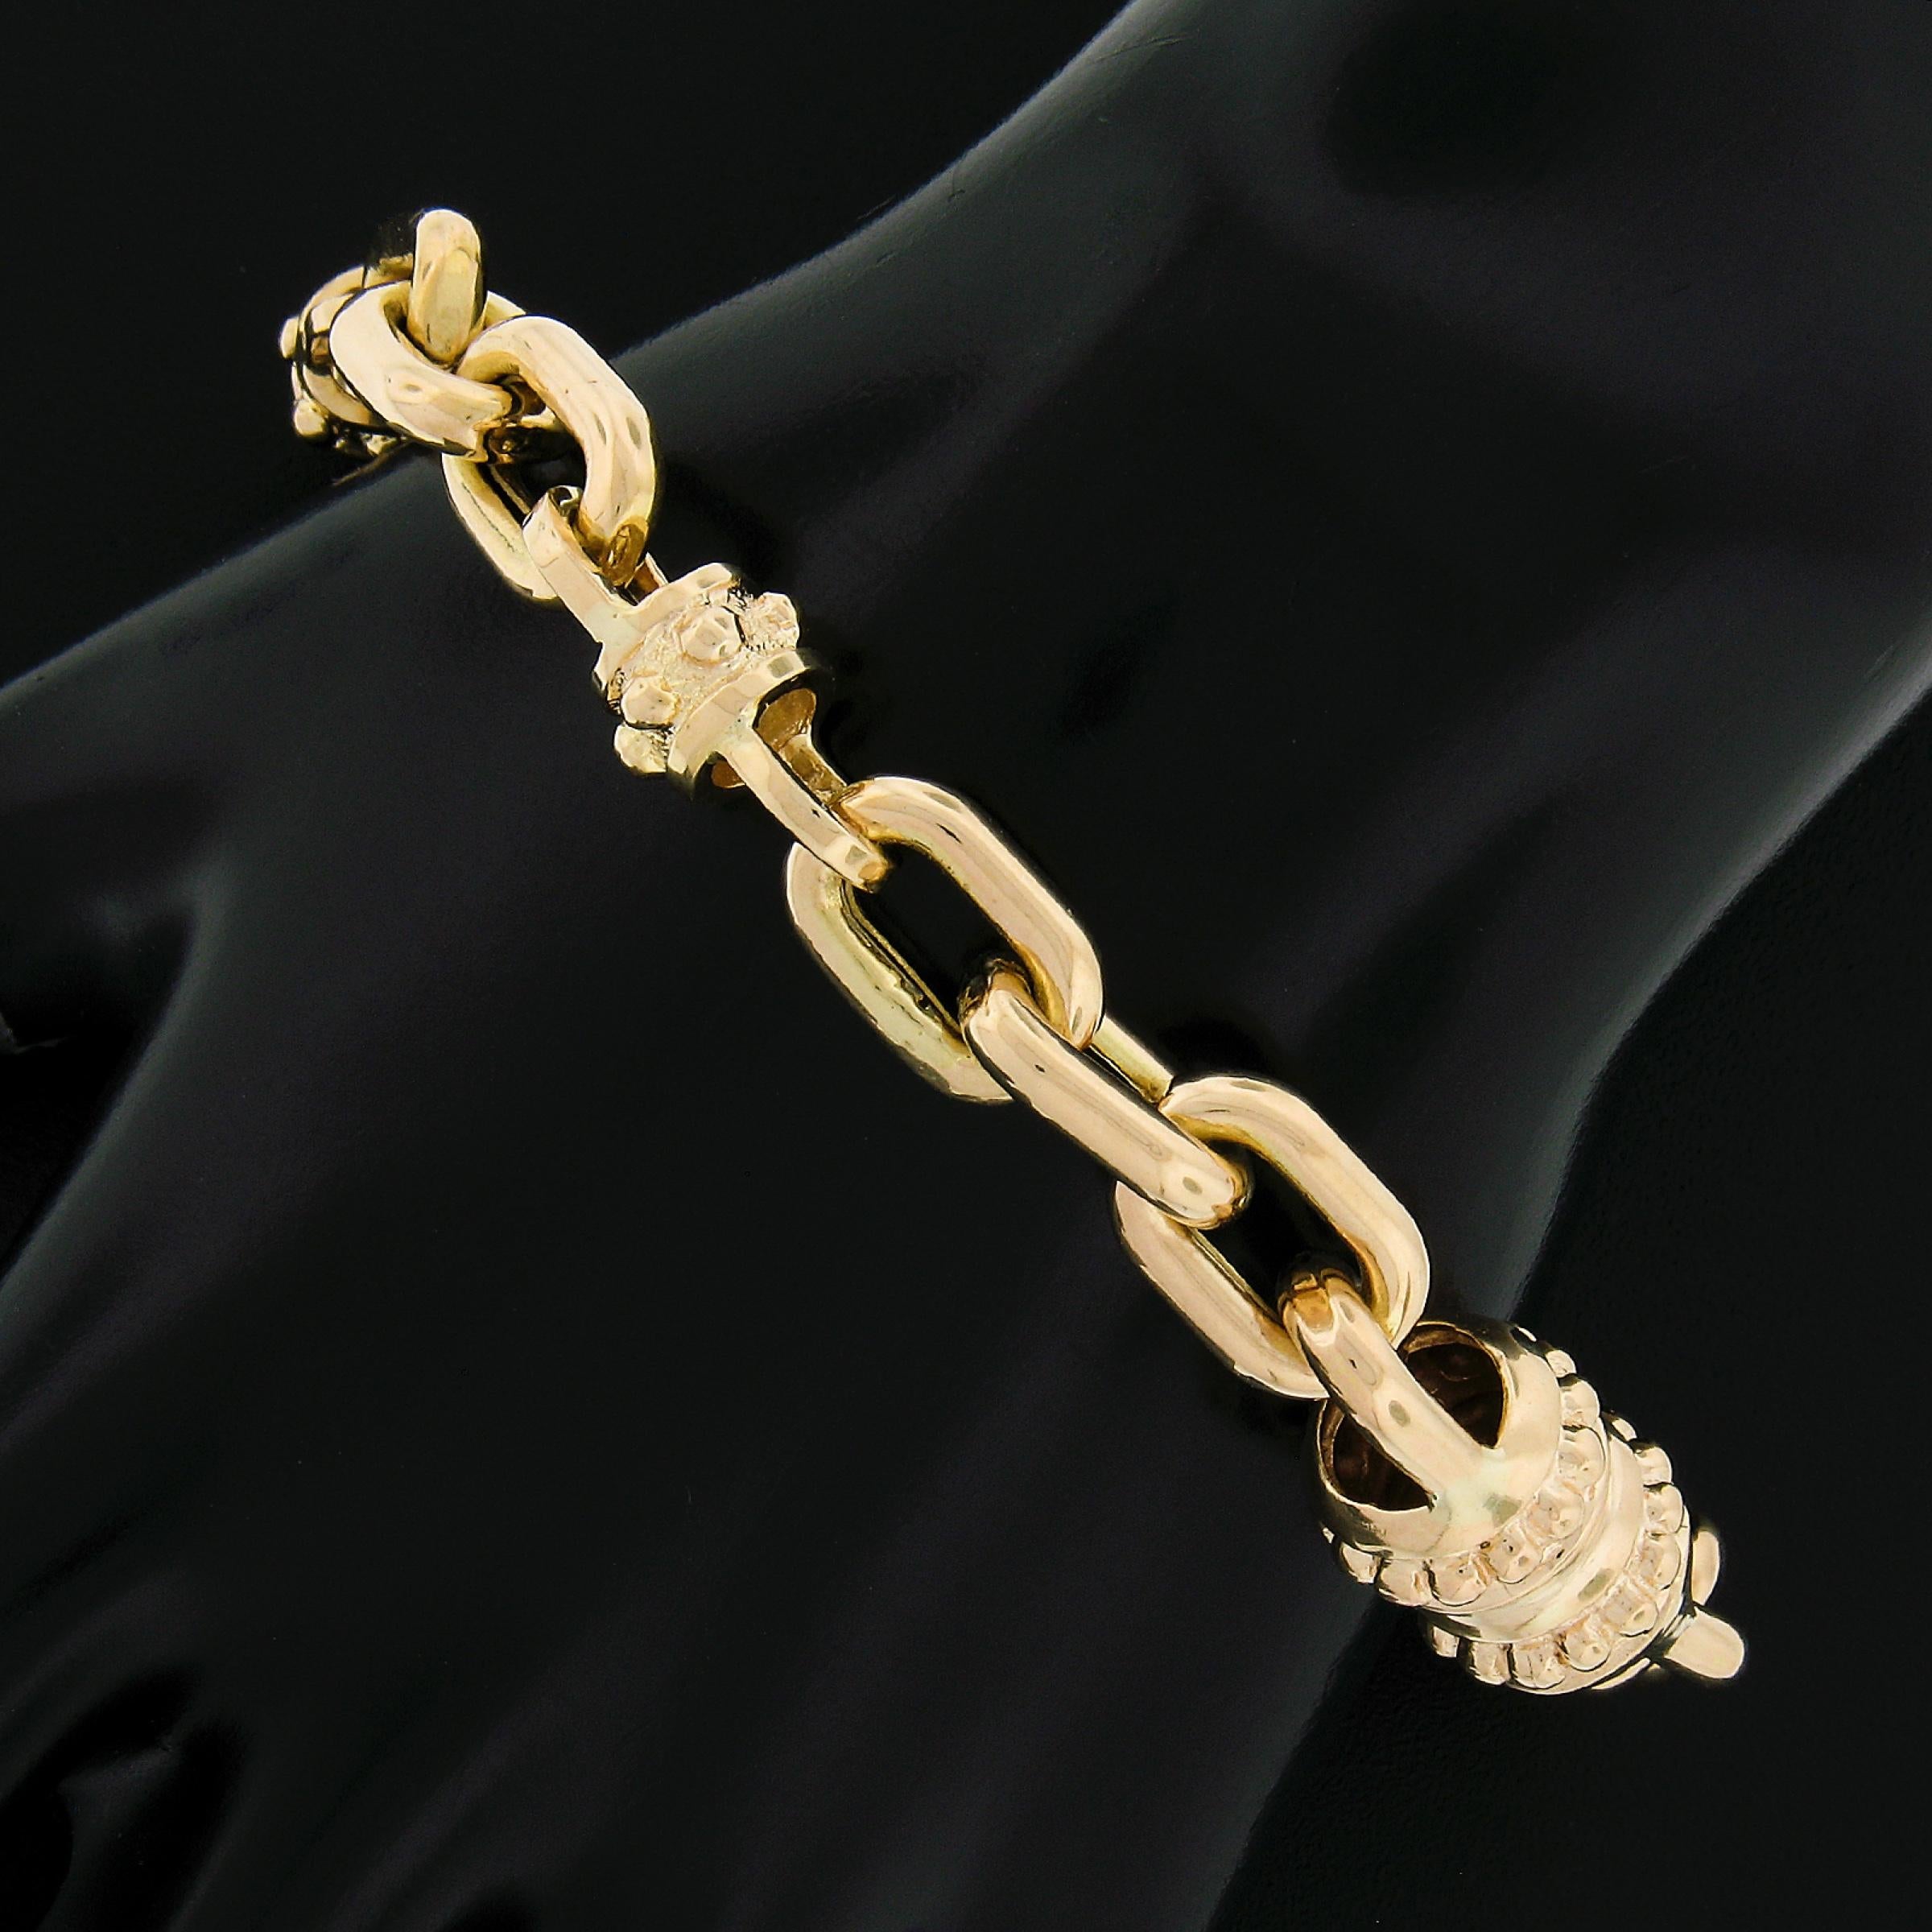 You are looking at a gorgeous unisex bracelet crafted in solid 14k yellow gold and features large open cable link design with beaded round sections throughout. The clasp is large lobster claw with beads and textured work. This bracelet has a nice